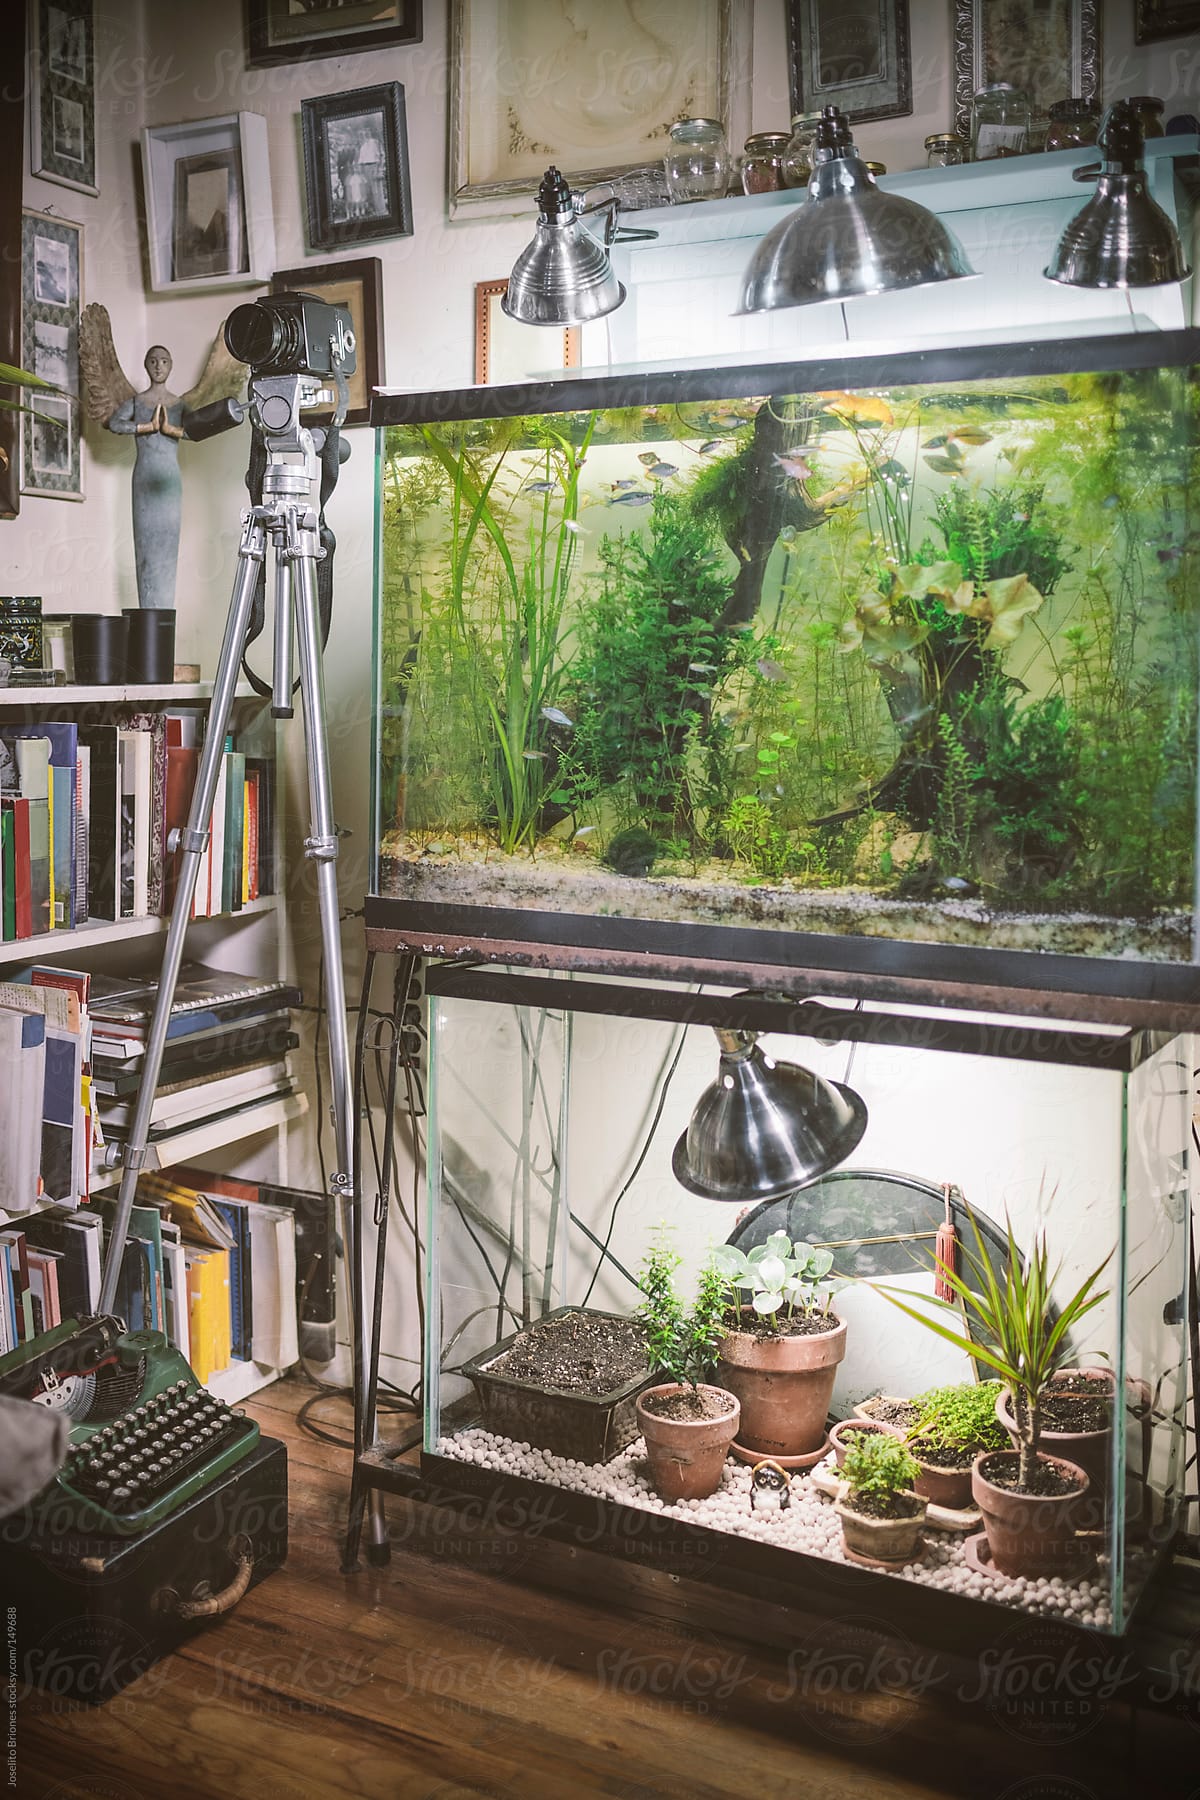 Empty Fish Tank Reuse As Terrarium For Small Plants And Seedlings In  Winter by Stocksy Contributor Joselito Briones - Stocksy